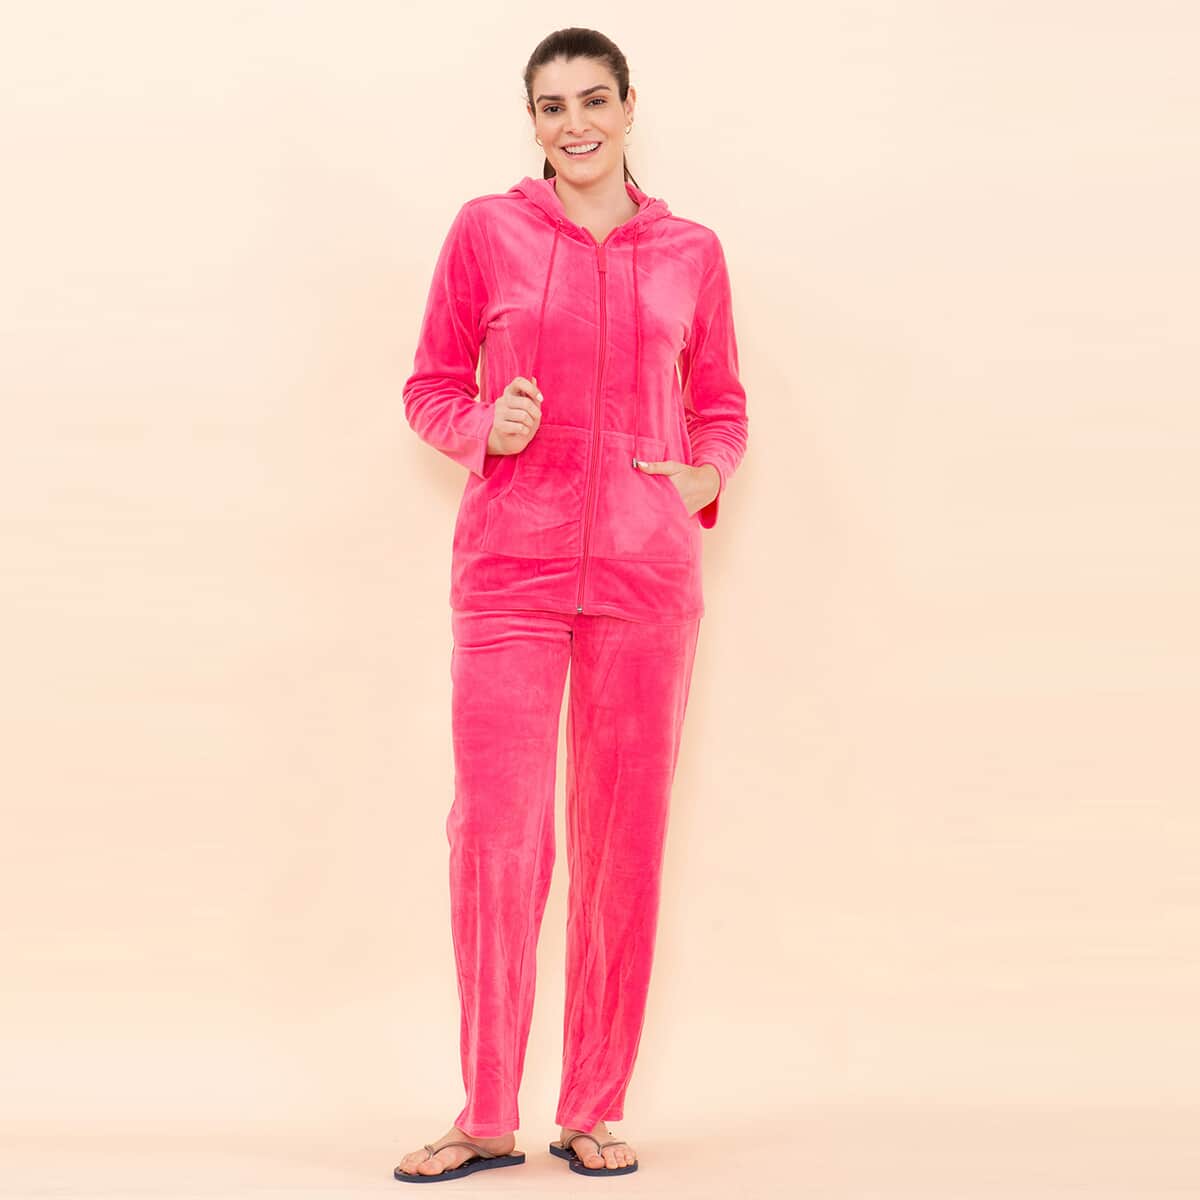 Tamsy LUX Pink Velour Track Suit Set - 1X image number 2